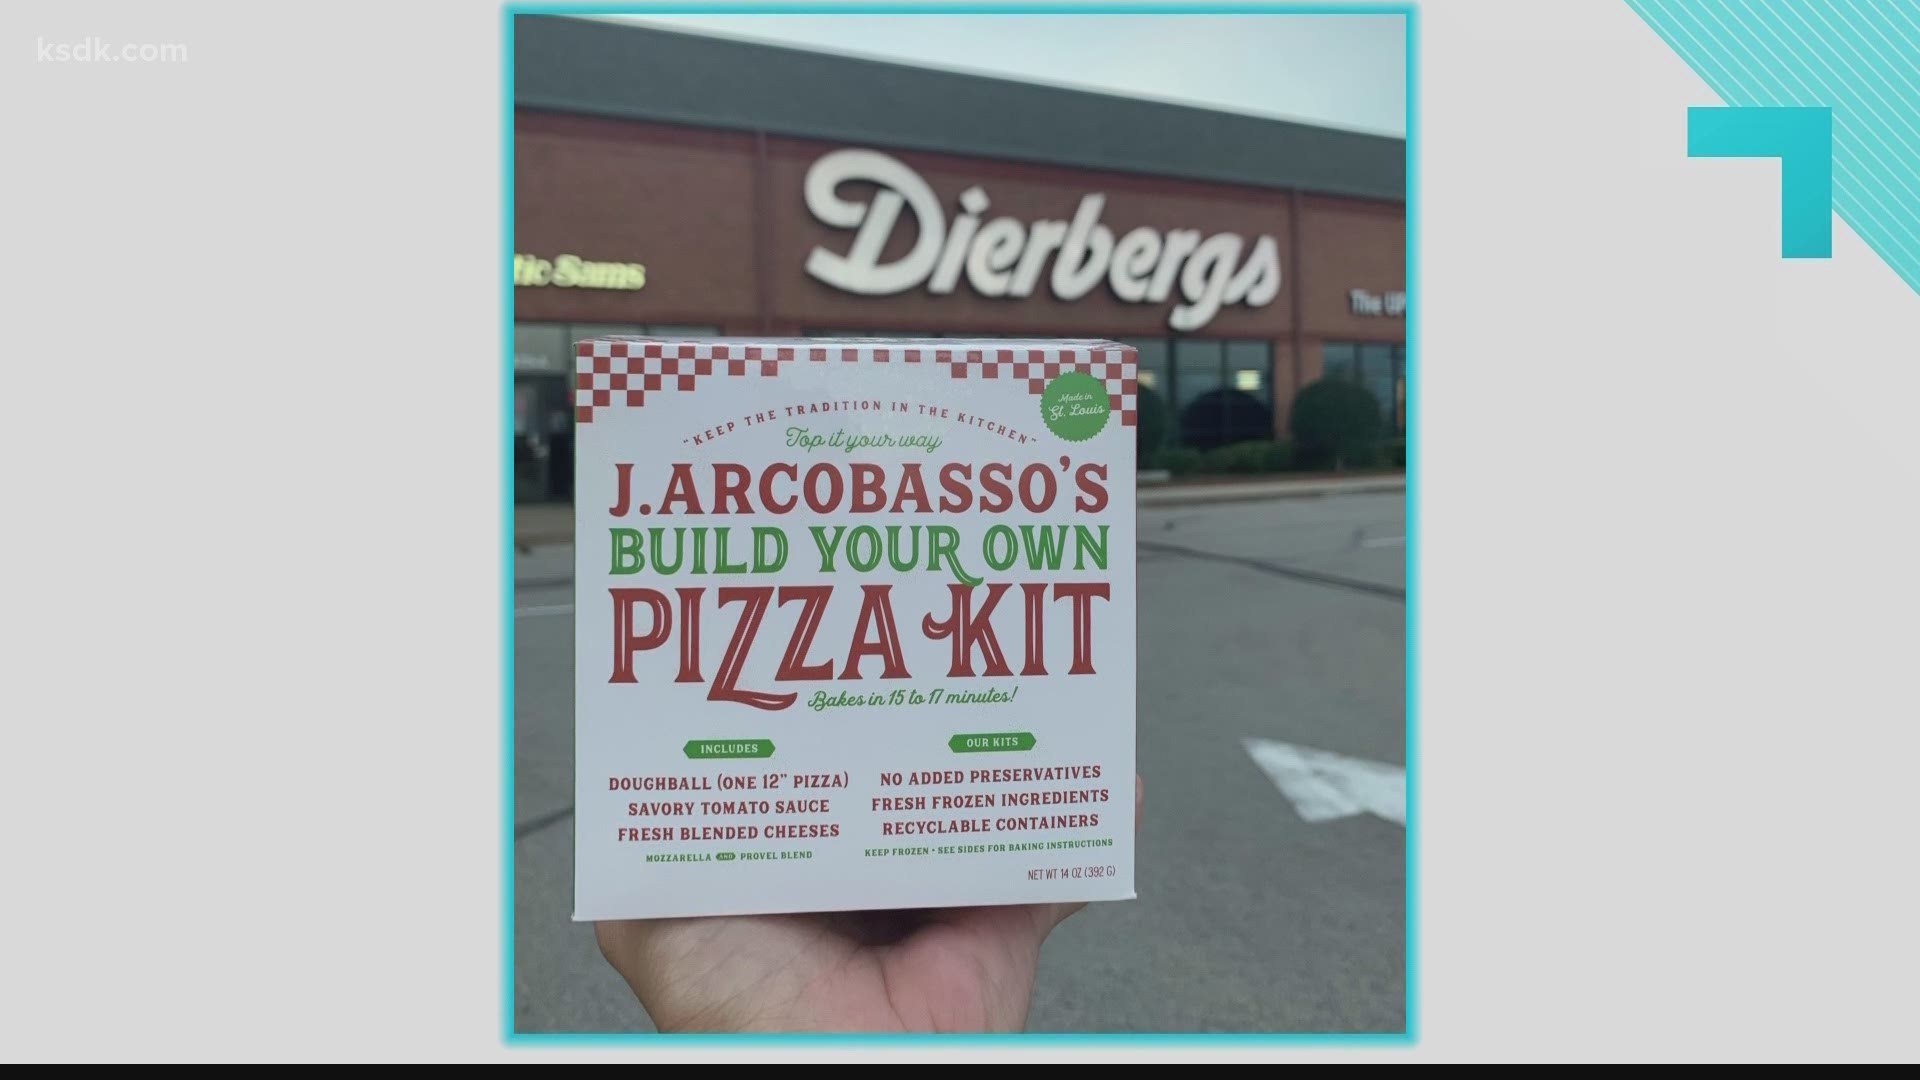 There is a new way to enjoy the delicious food behind the Arcobasso name with J. Arcobasso’s Build-Your-Own Pizza Kits.